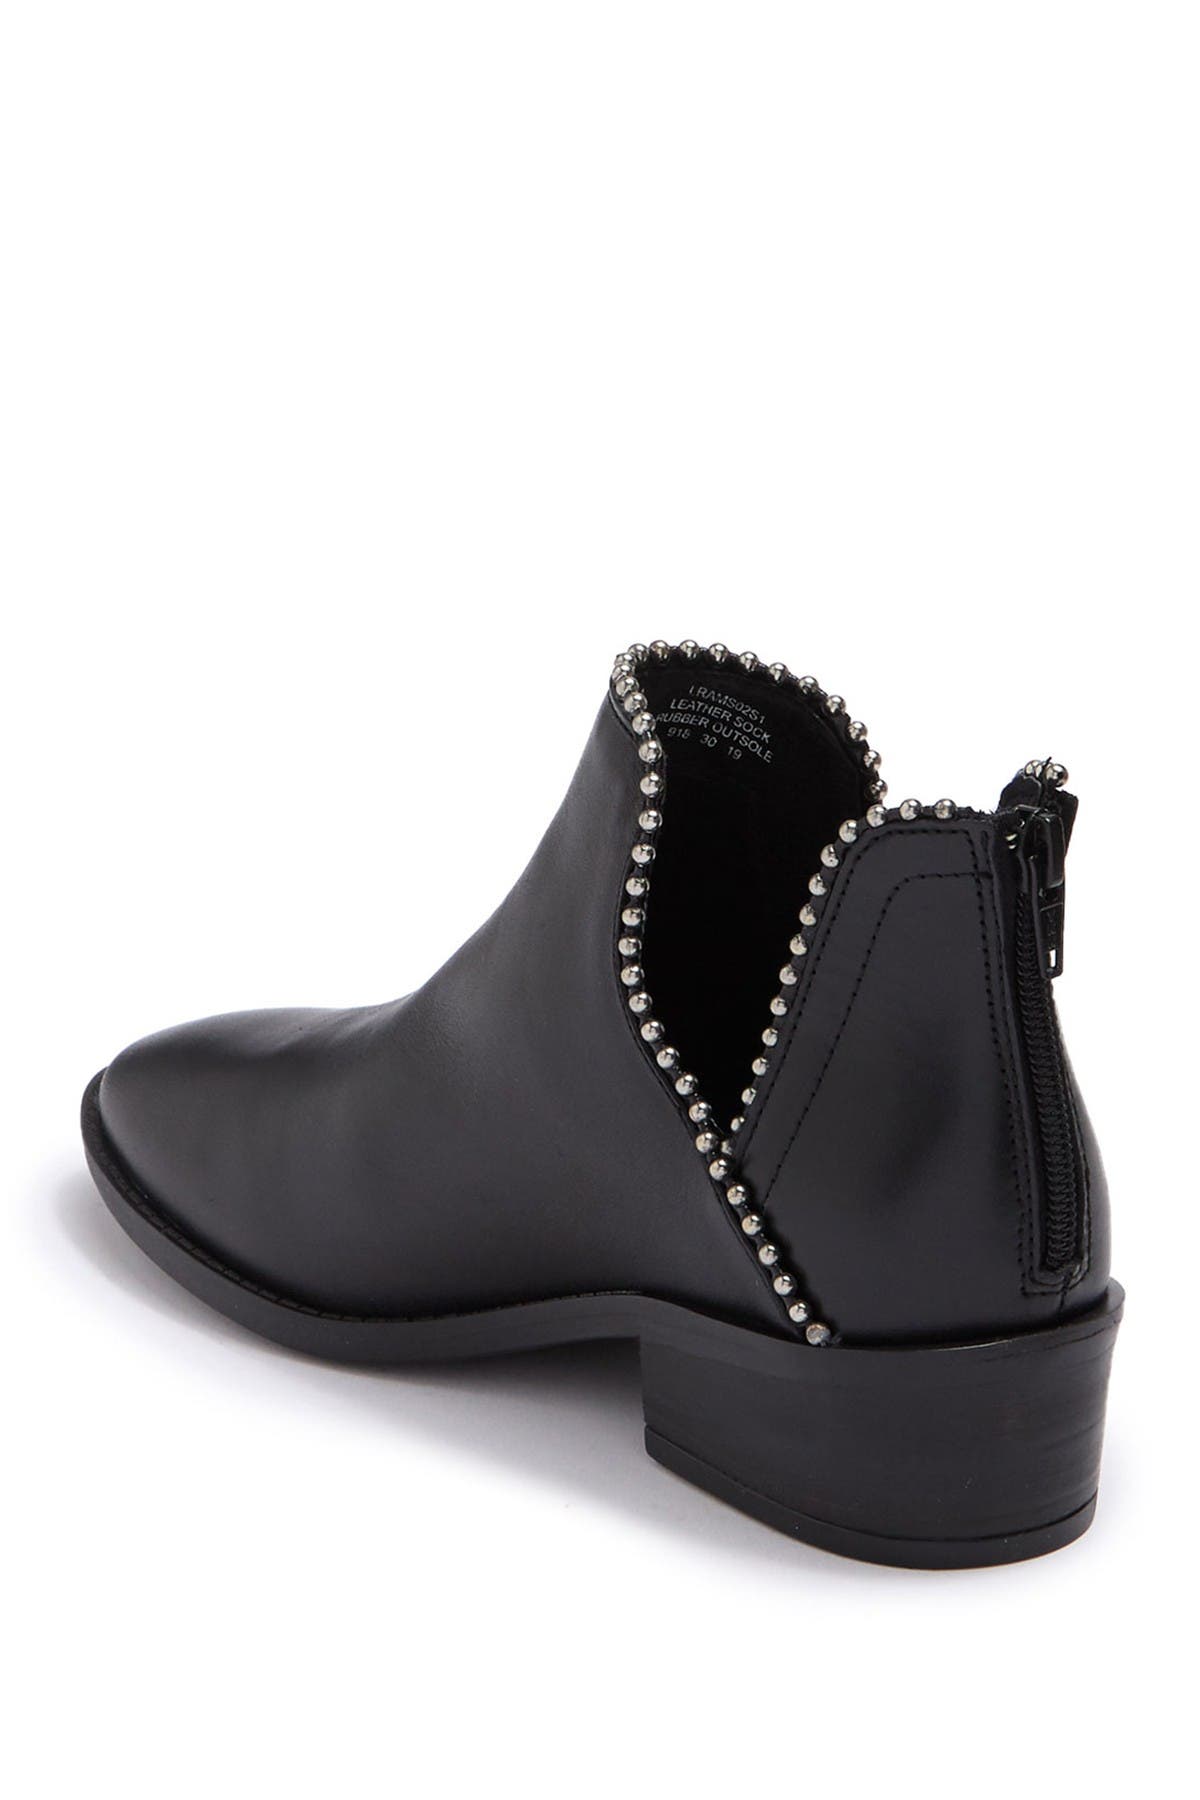 steve madden laramie suede cutout ankle boot